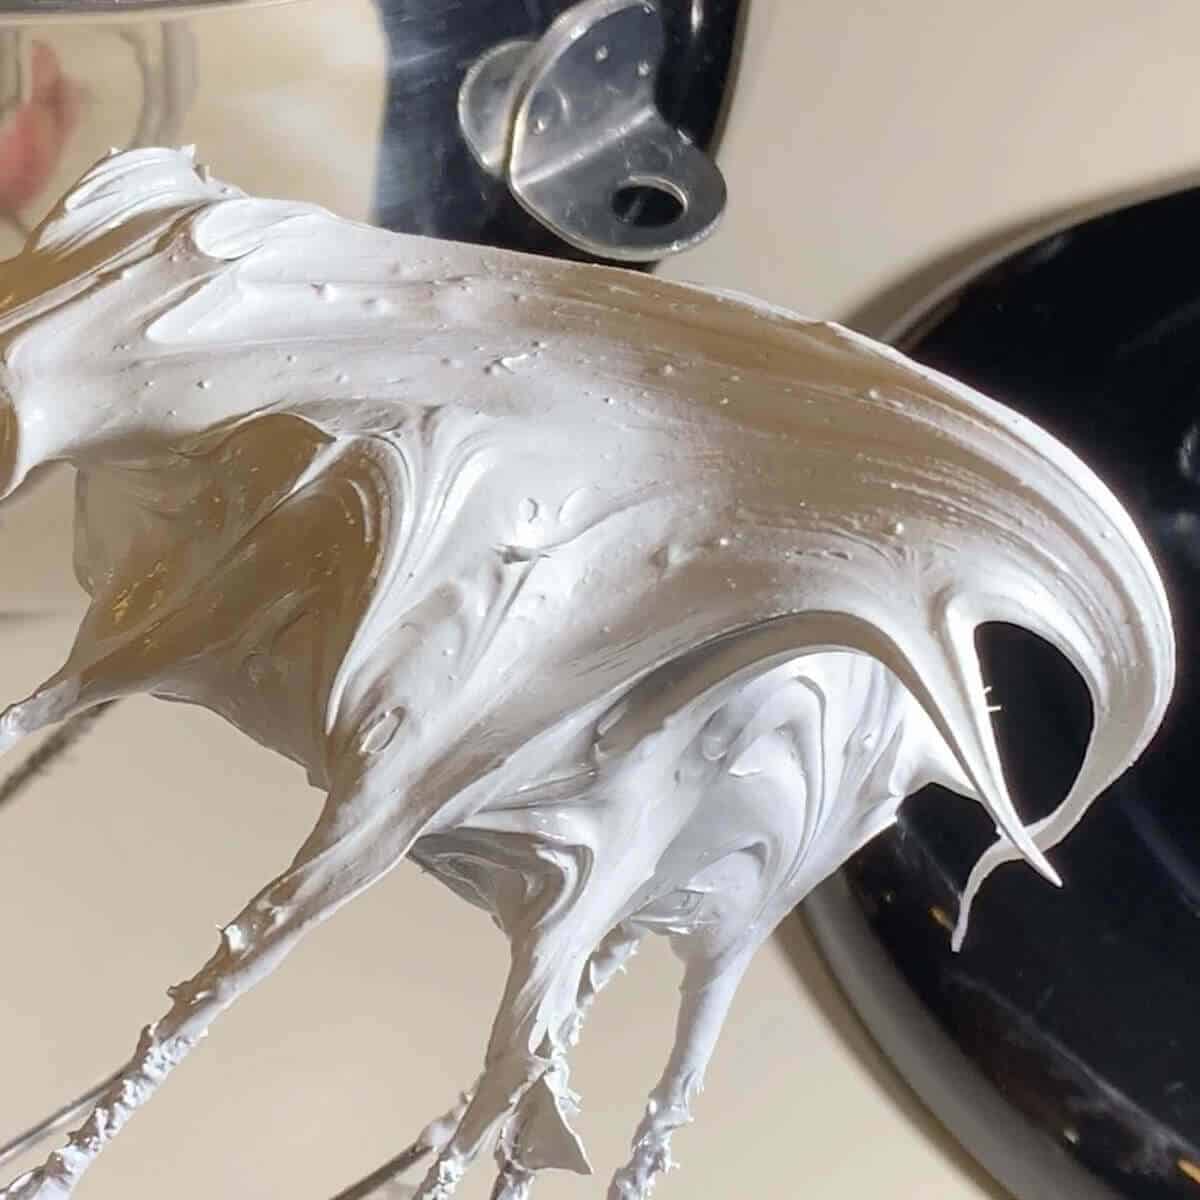 Marshmallow creme on a whisk.